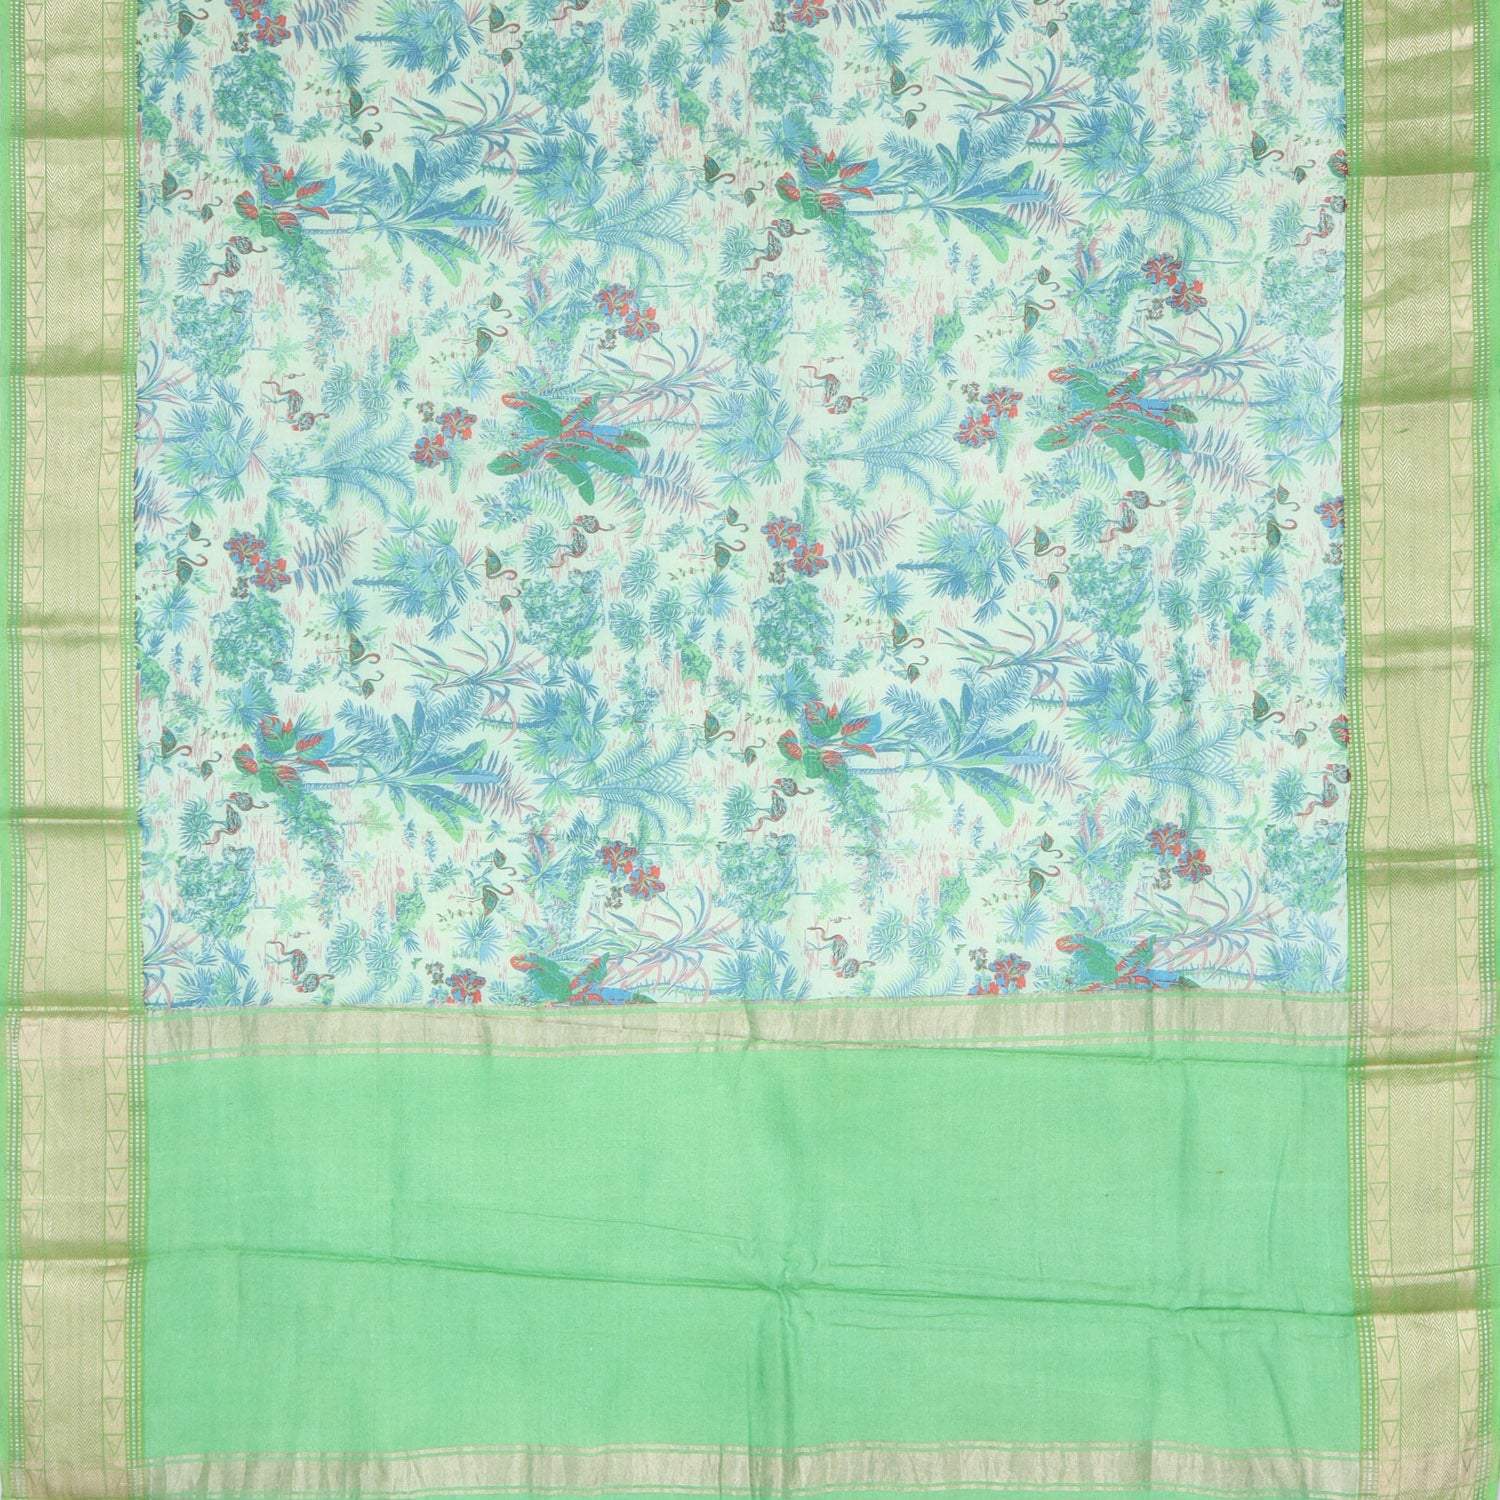 Mint Green Cotton Saree With Floral Printed Motifs - Singhania's